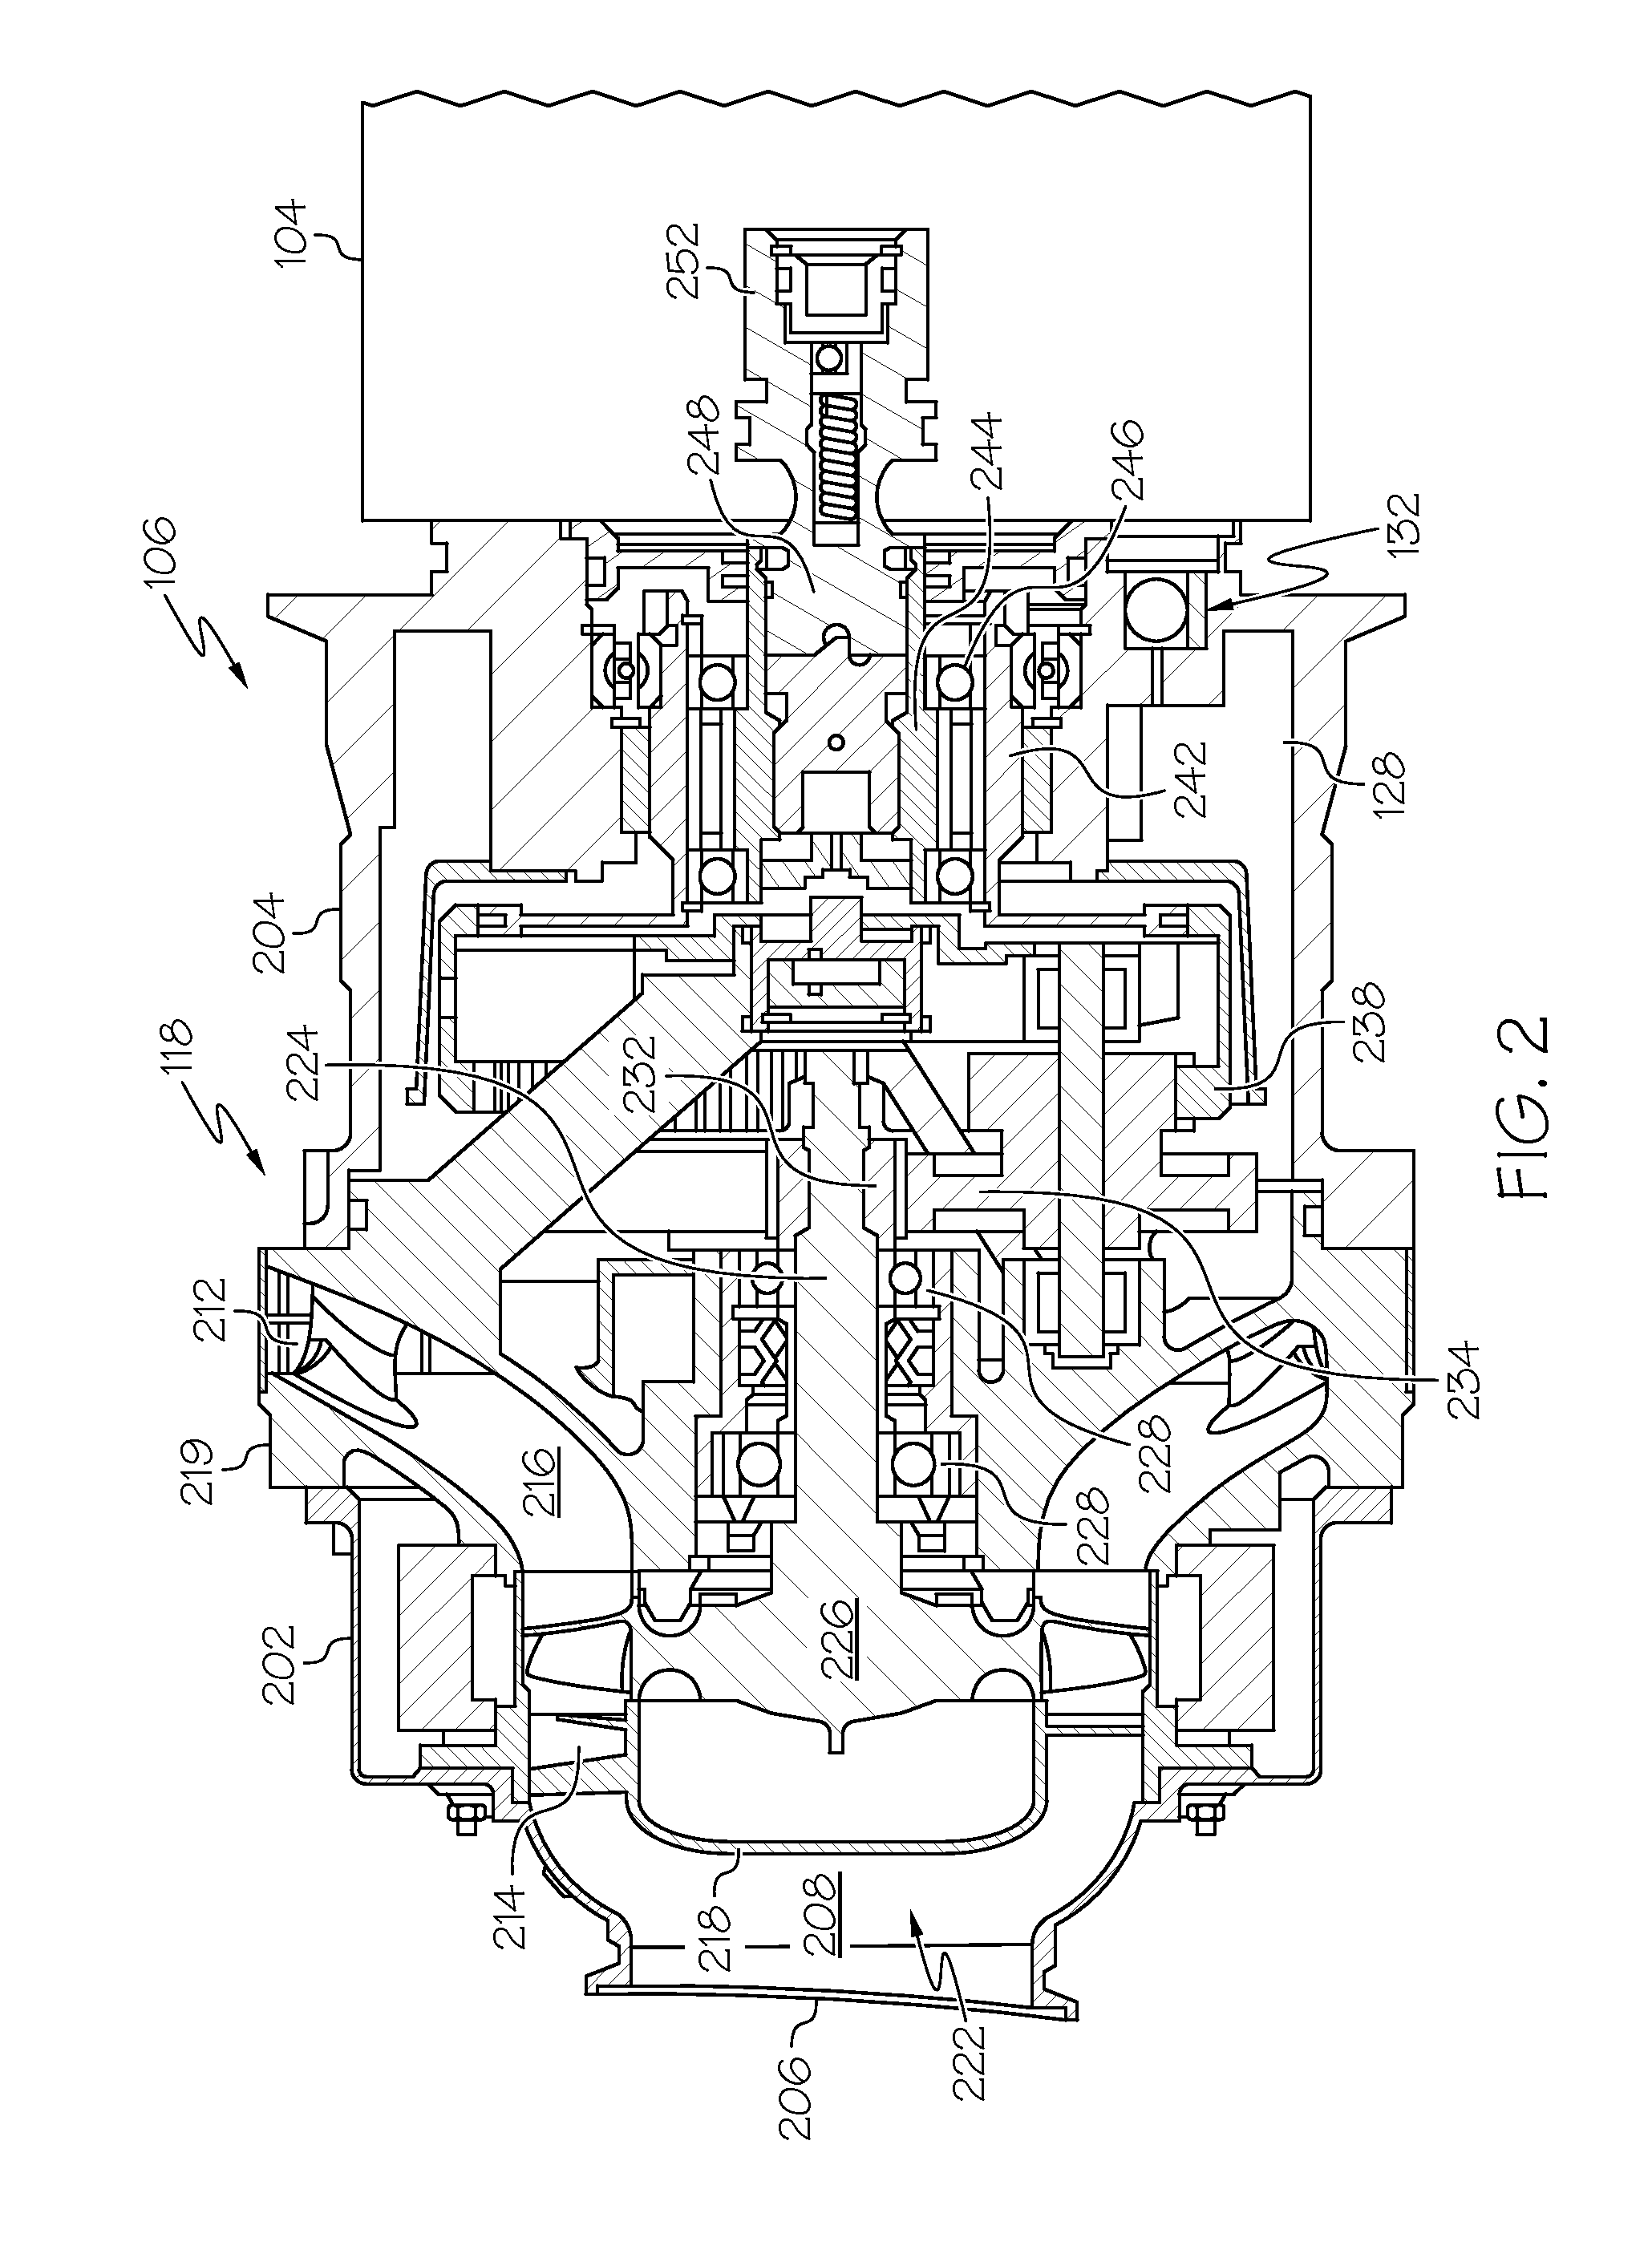 Air turbine starter including a lightweight, low differential pressure check valve